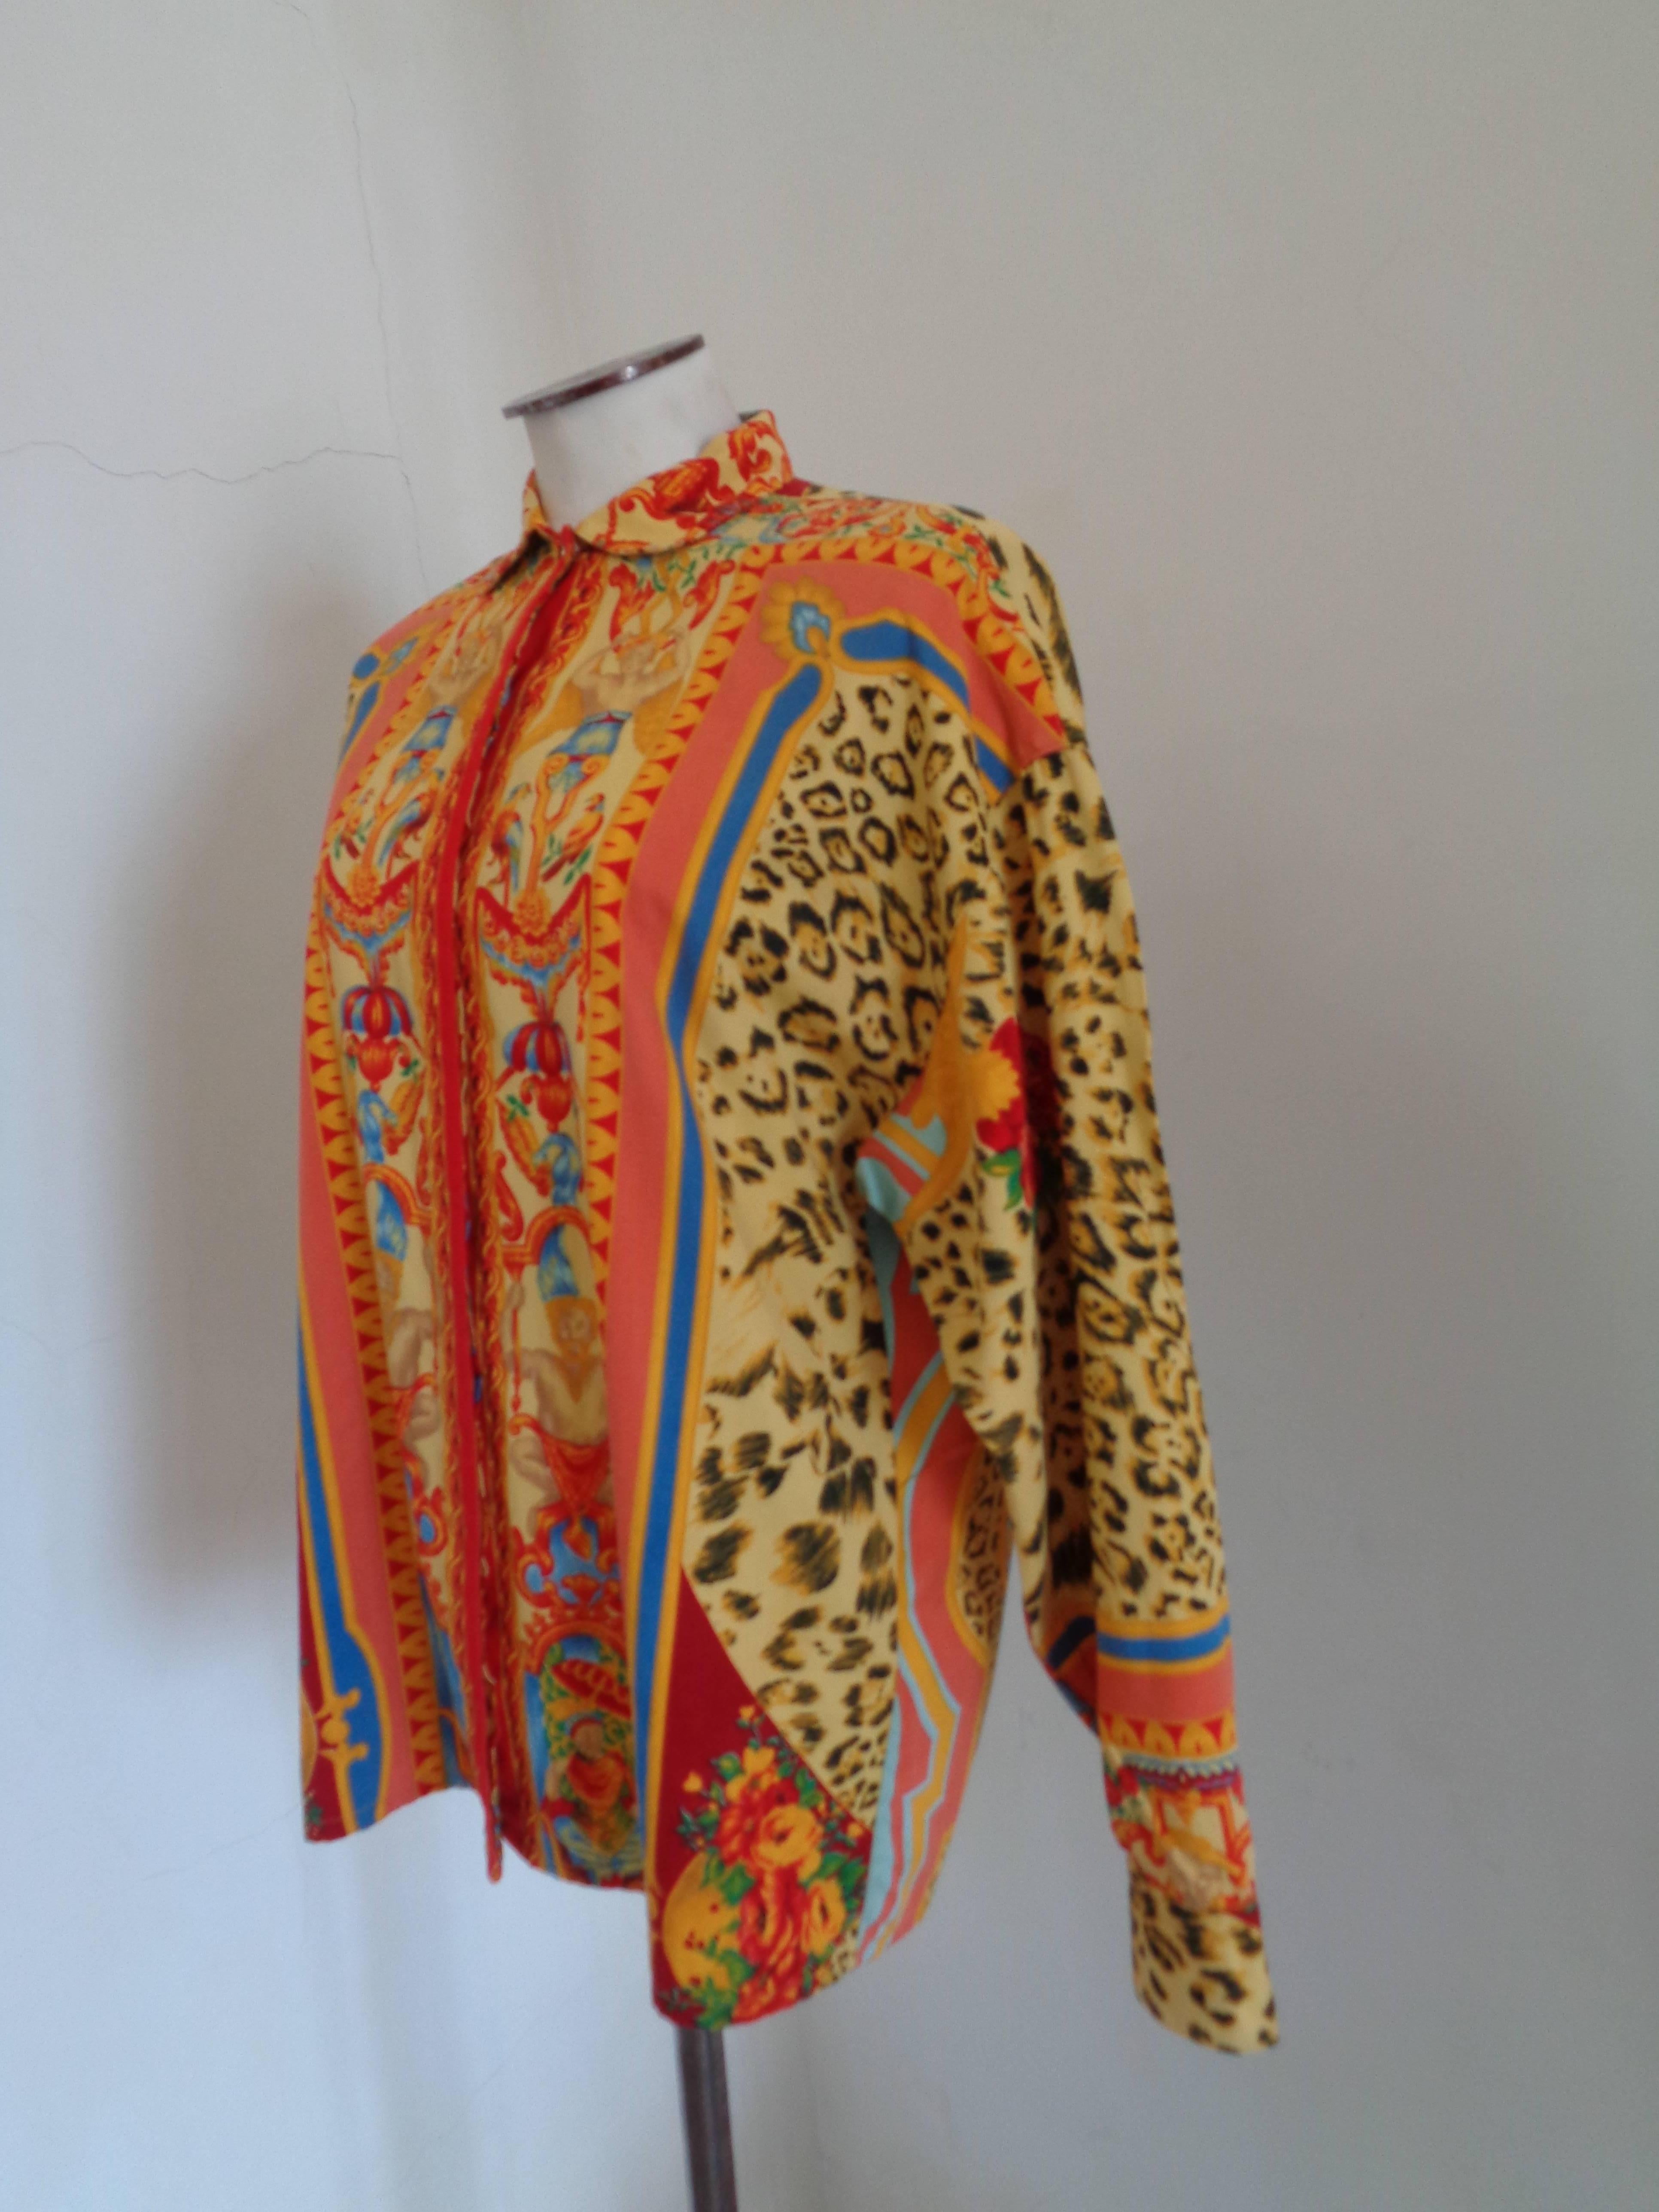 Versus by Gianni Versace Shirt

totally made in italy in size 44